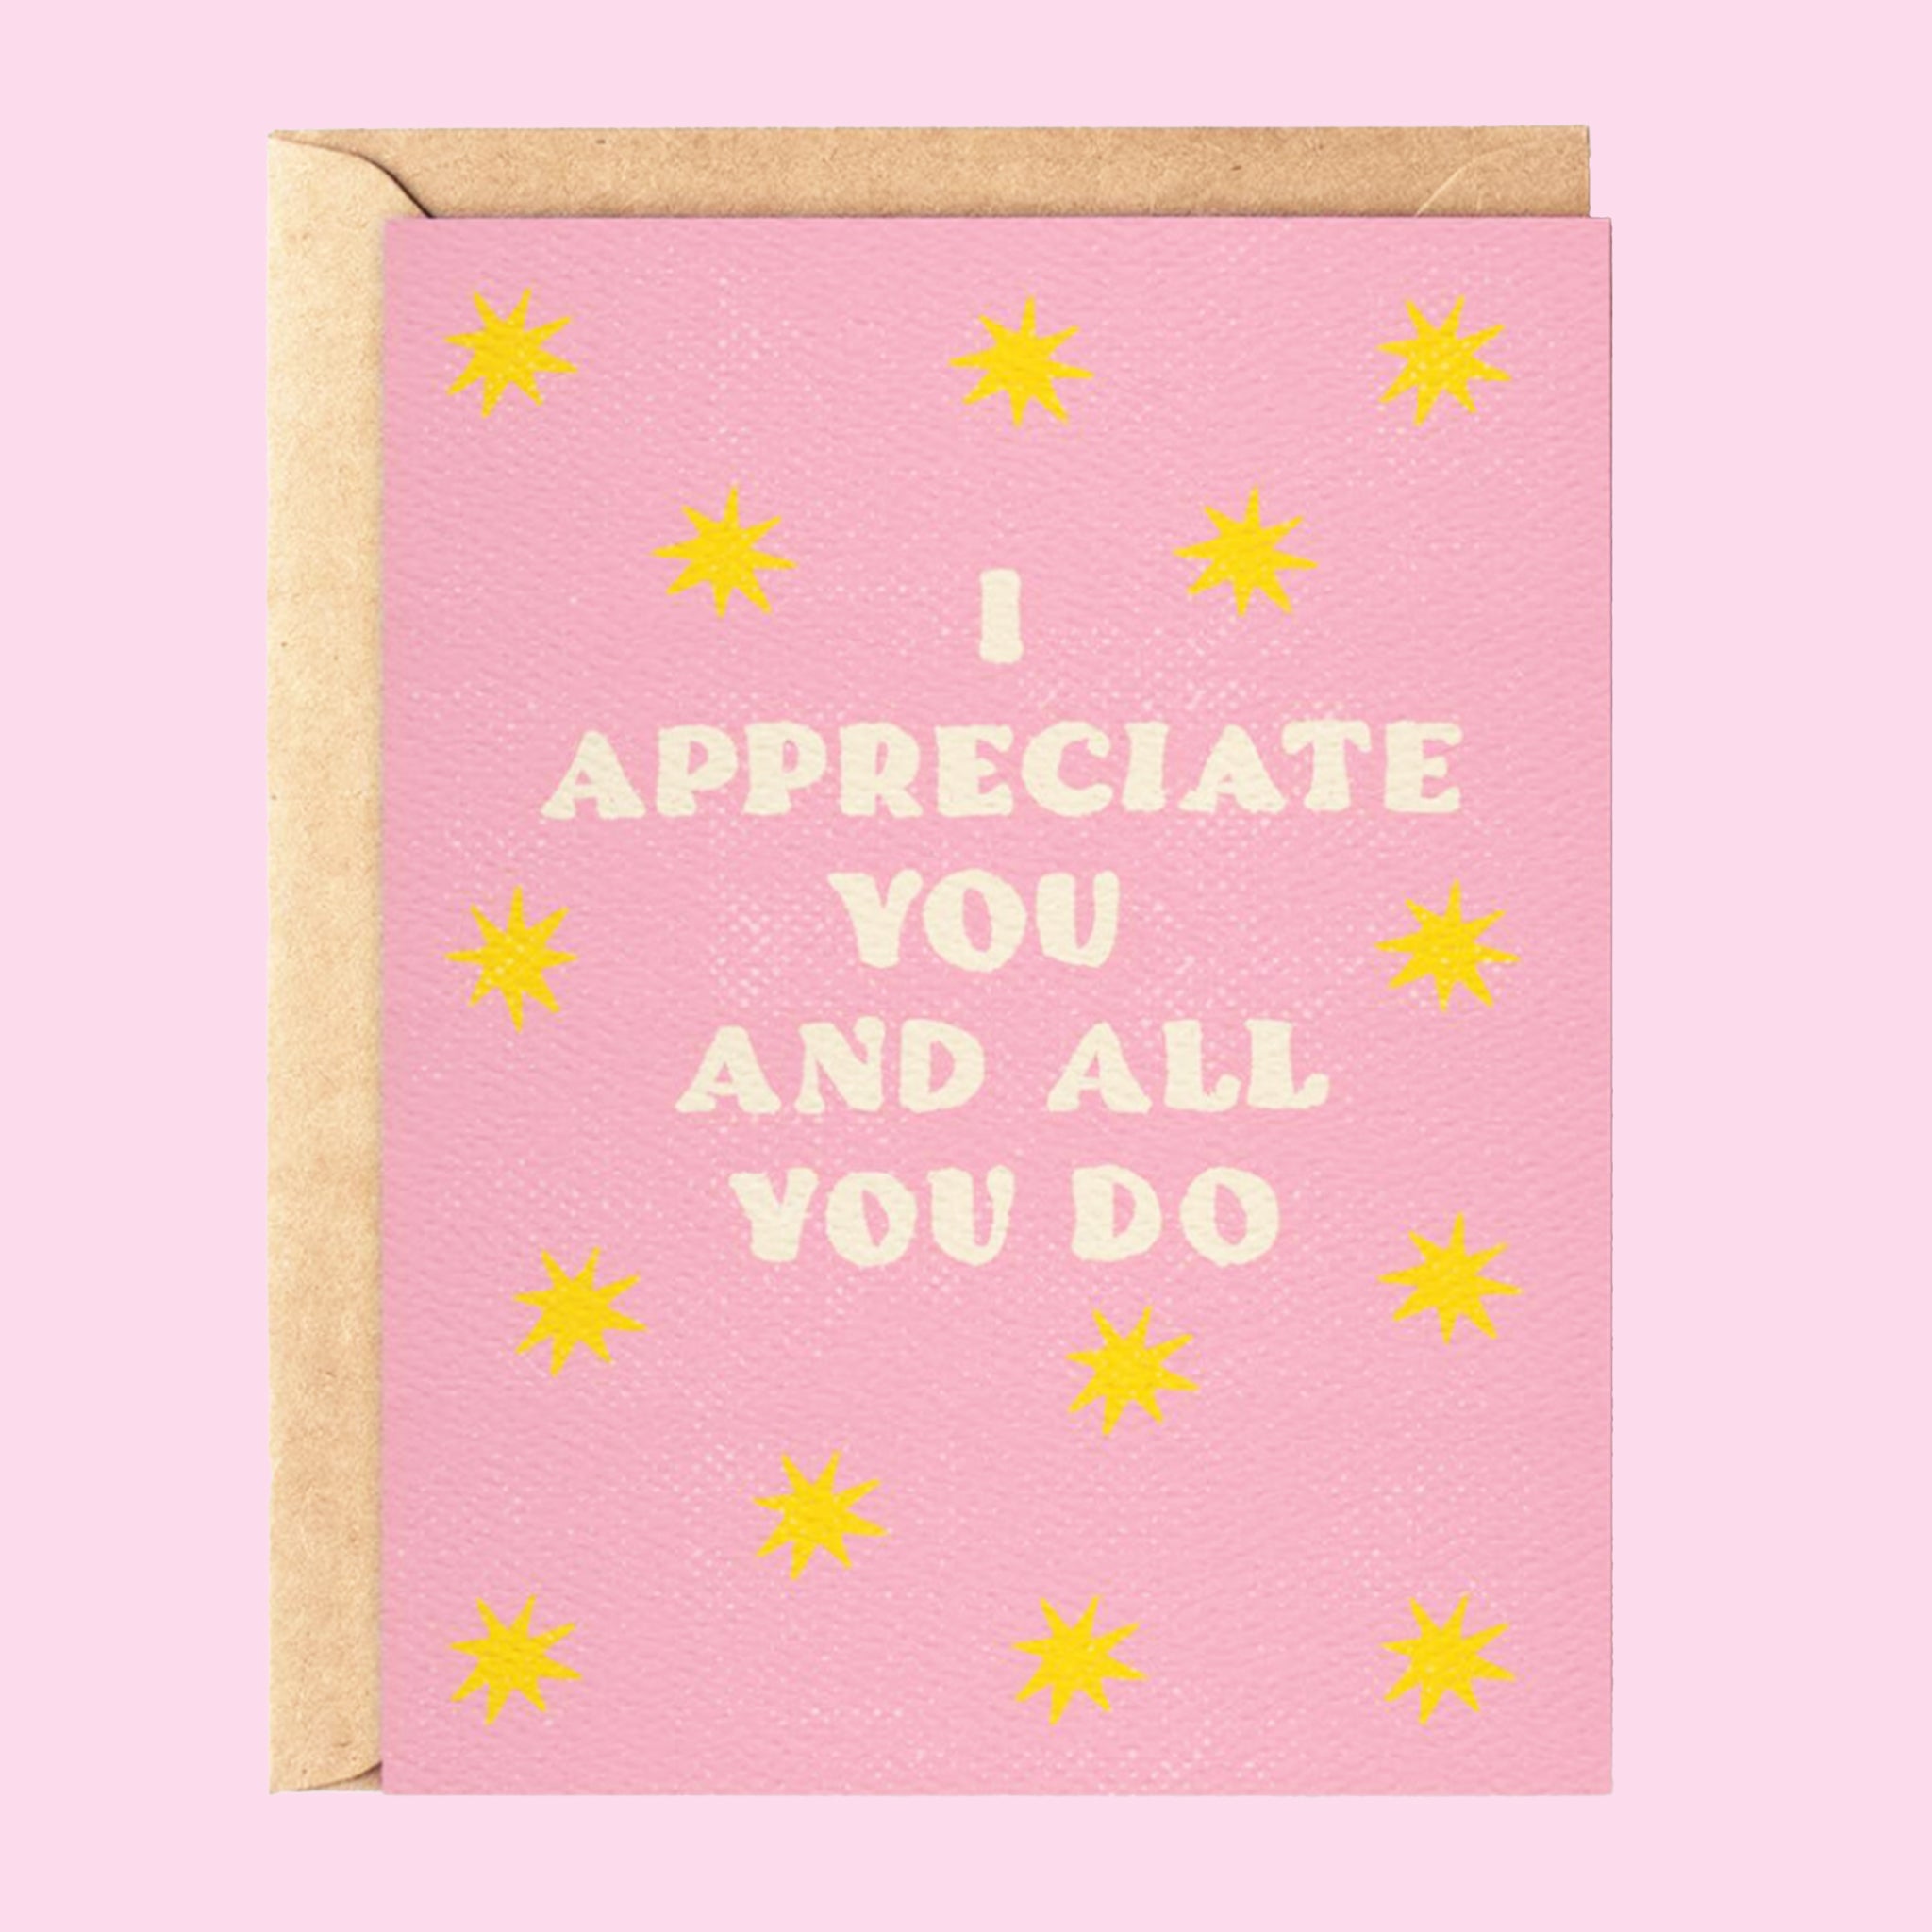 A pink card with a yellow star print and text that reads, "I Appreciate You And All You Do". 